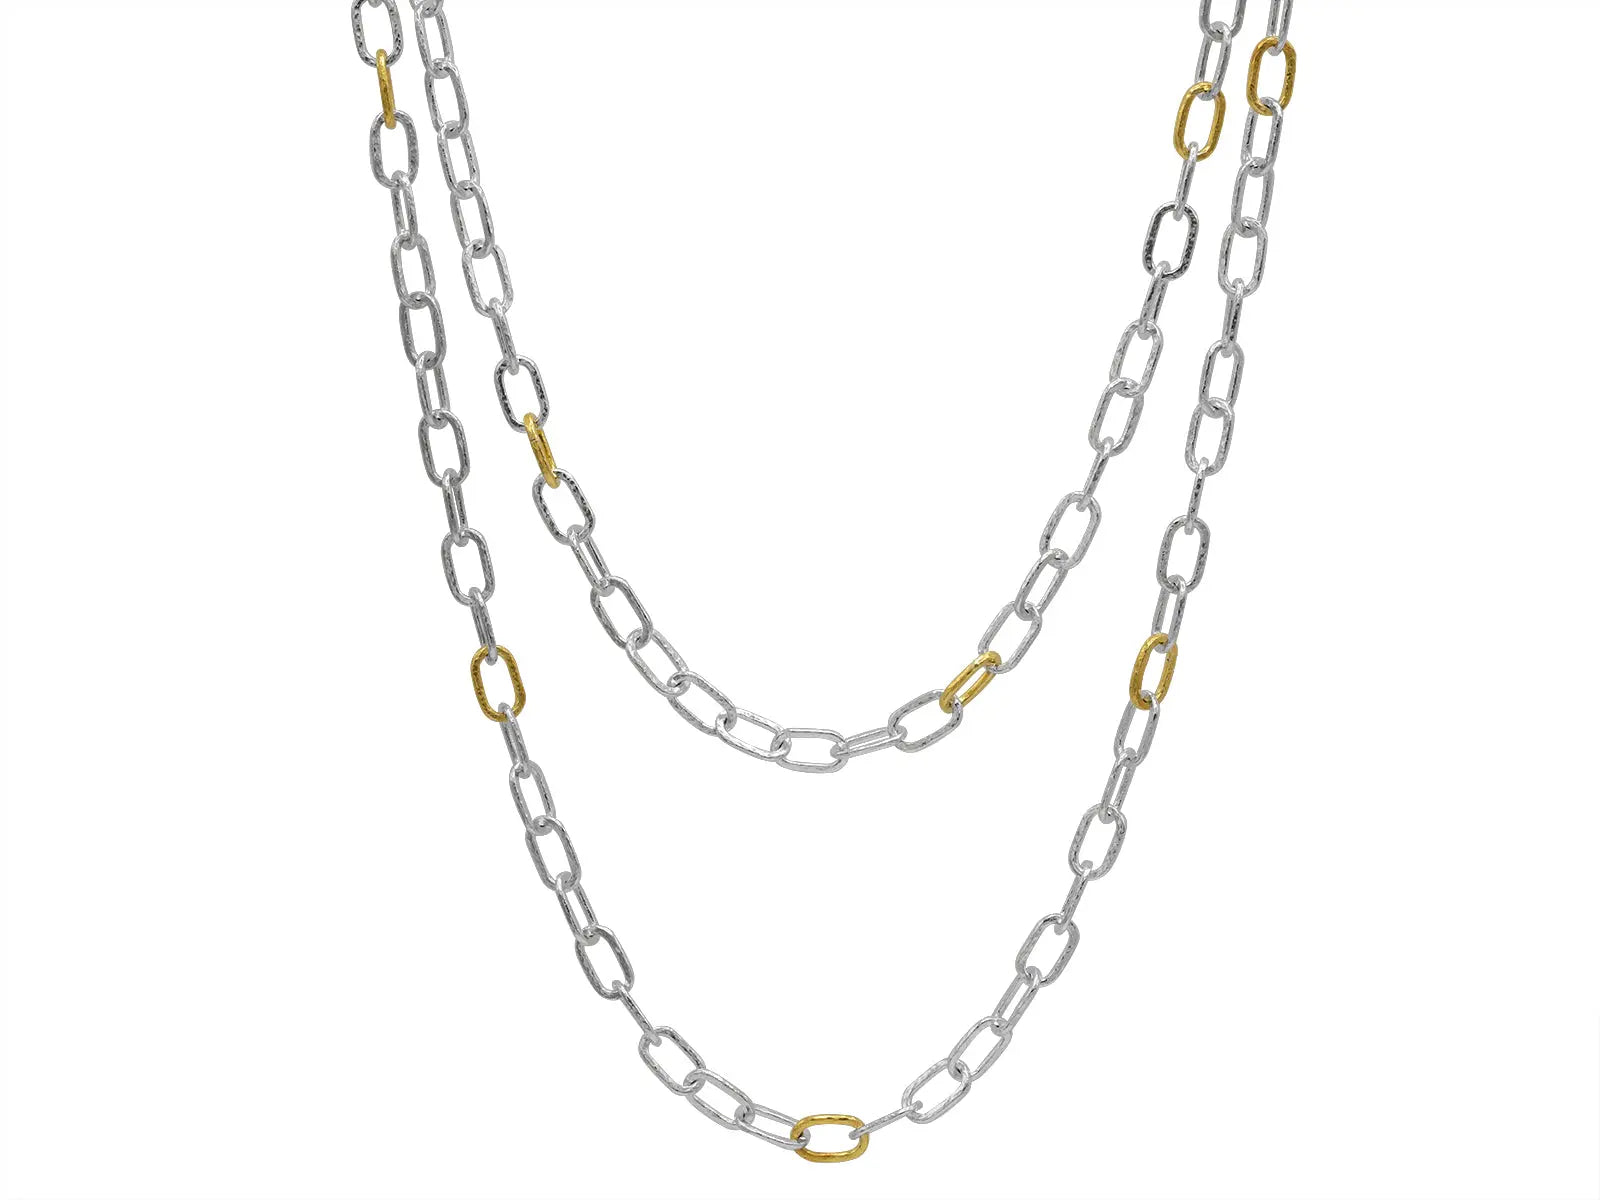 Link Necklace in Sterling Silver with 24k Gold Vermeil long chain. The length is 36 inches.  Designed by Gurhan